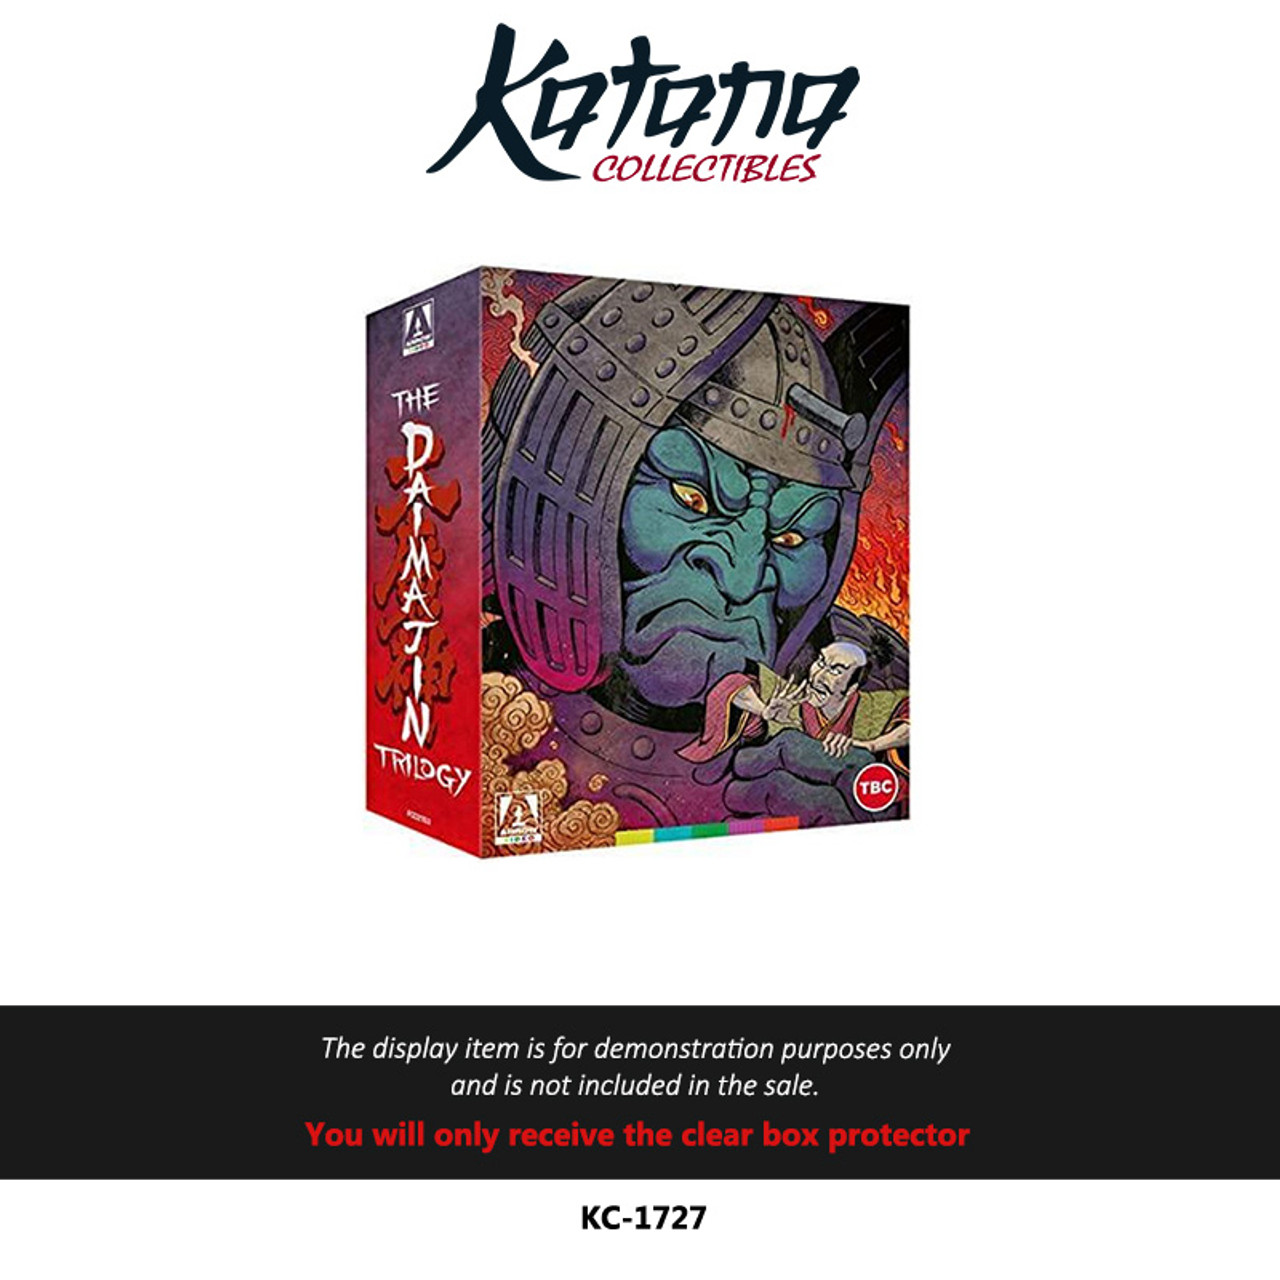 Katana Collectibles Protector For Arrow Films The Daimajin Trilogy Blu Ray, Limited Edition